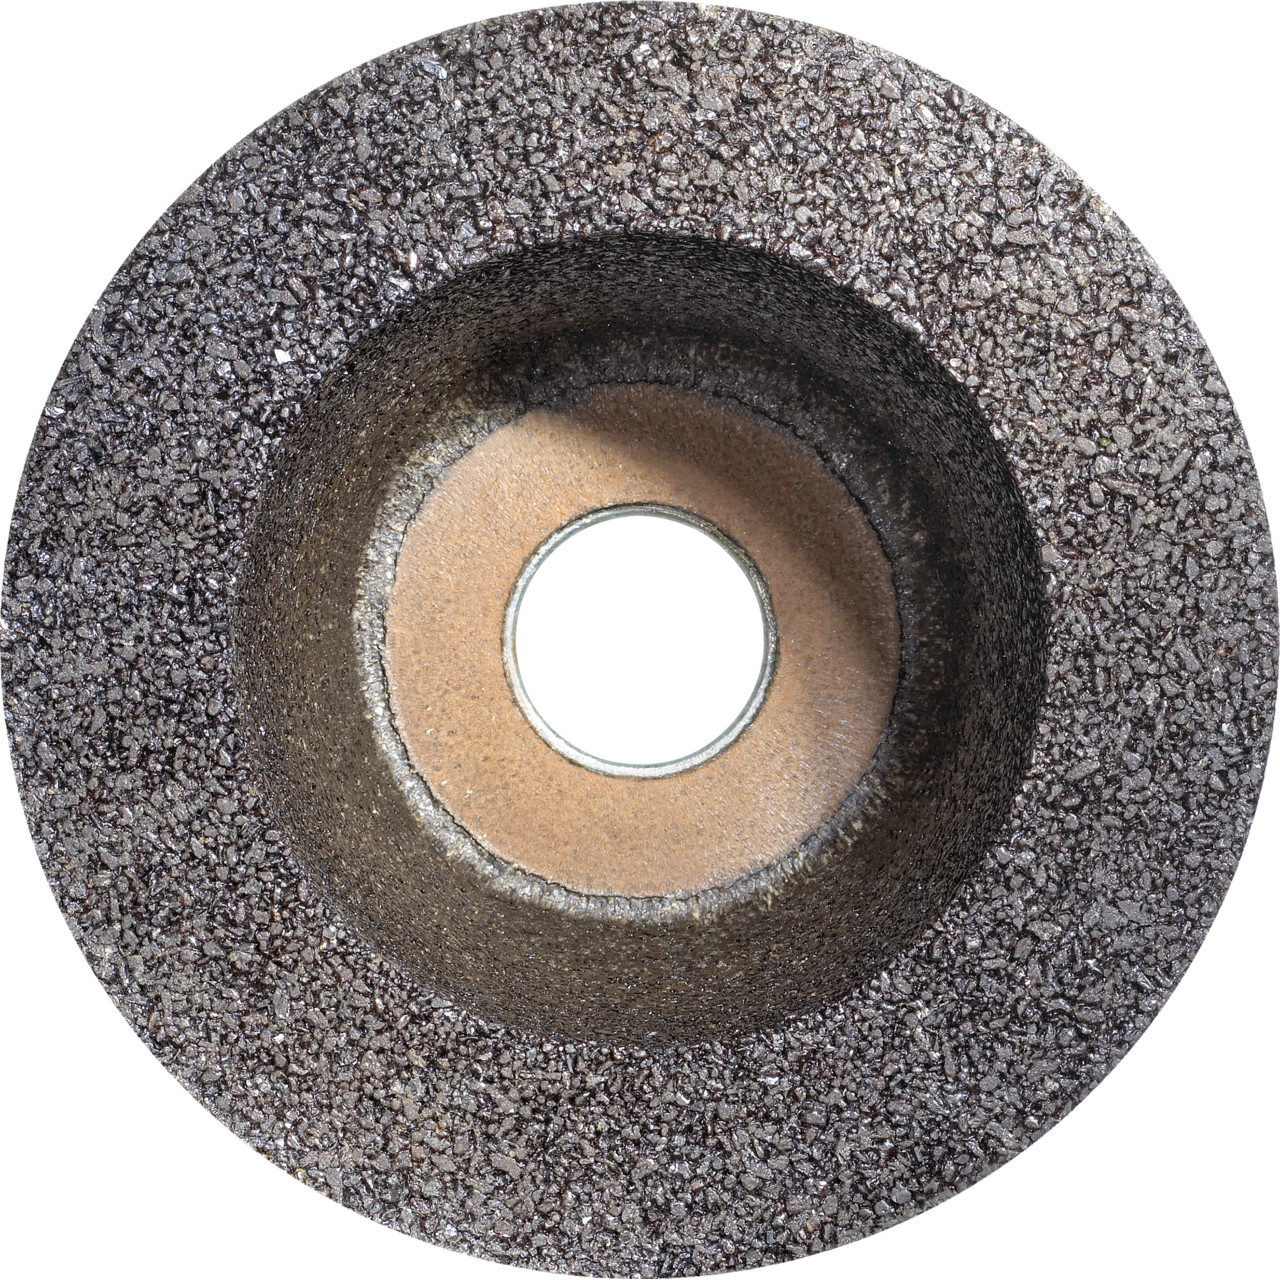 TYROLIT Resin cup DxTxGE 100x45xM14 For stone, shape: 6ZB cup wheel, Art. 89383